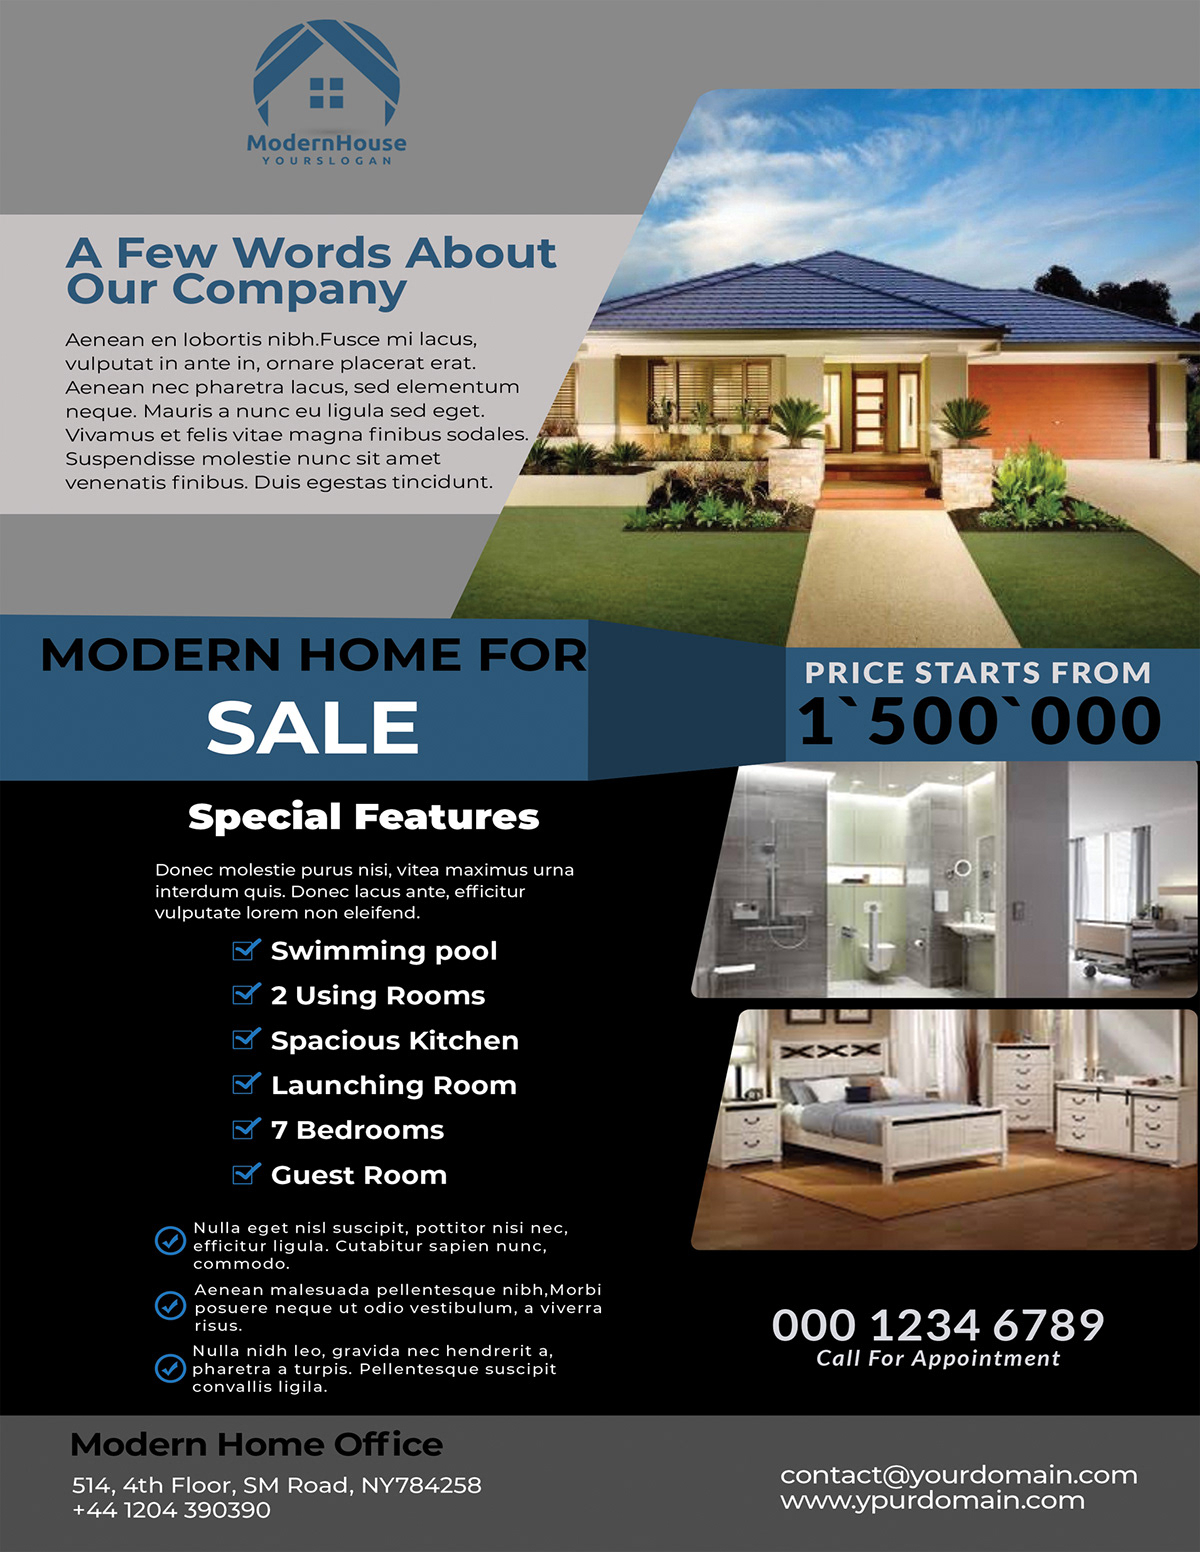 House For Sale Flyer Templates On Student Show For House For Sale Flyer Template